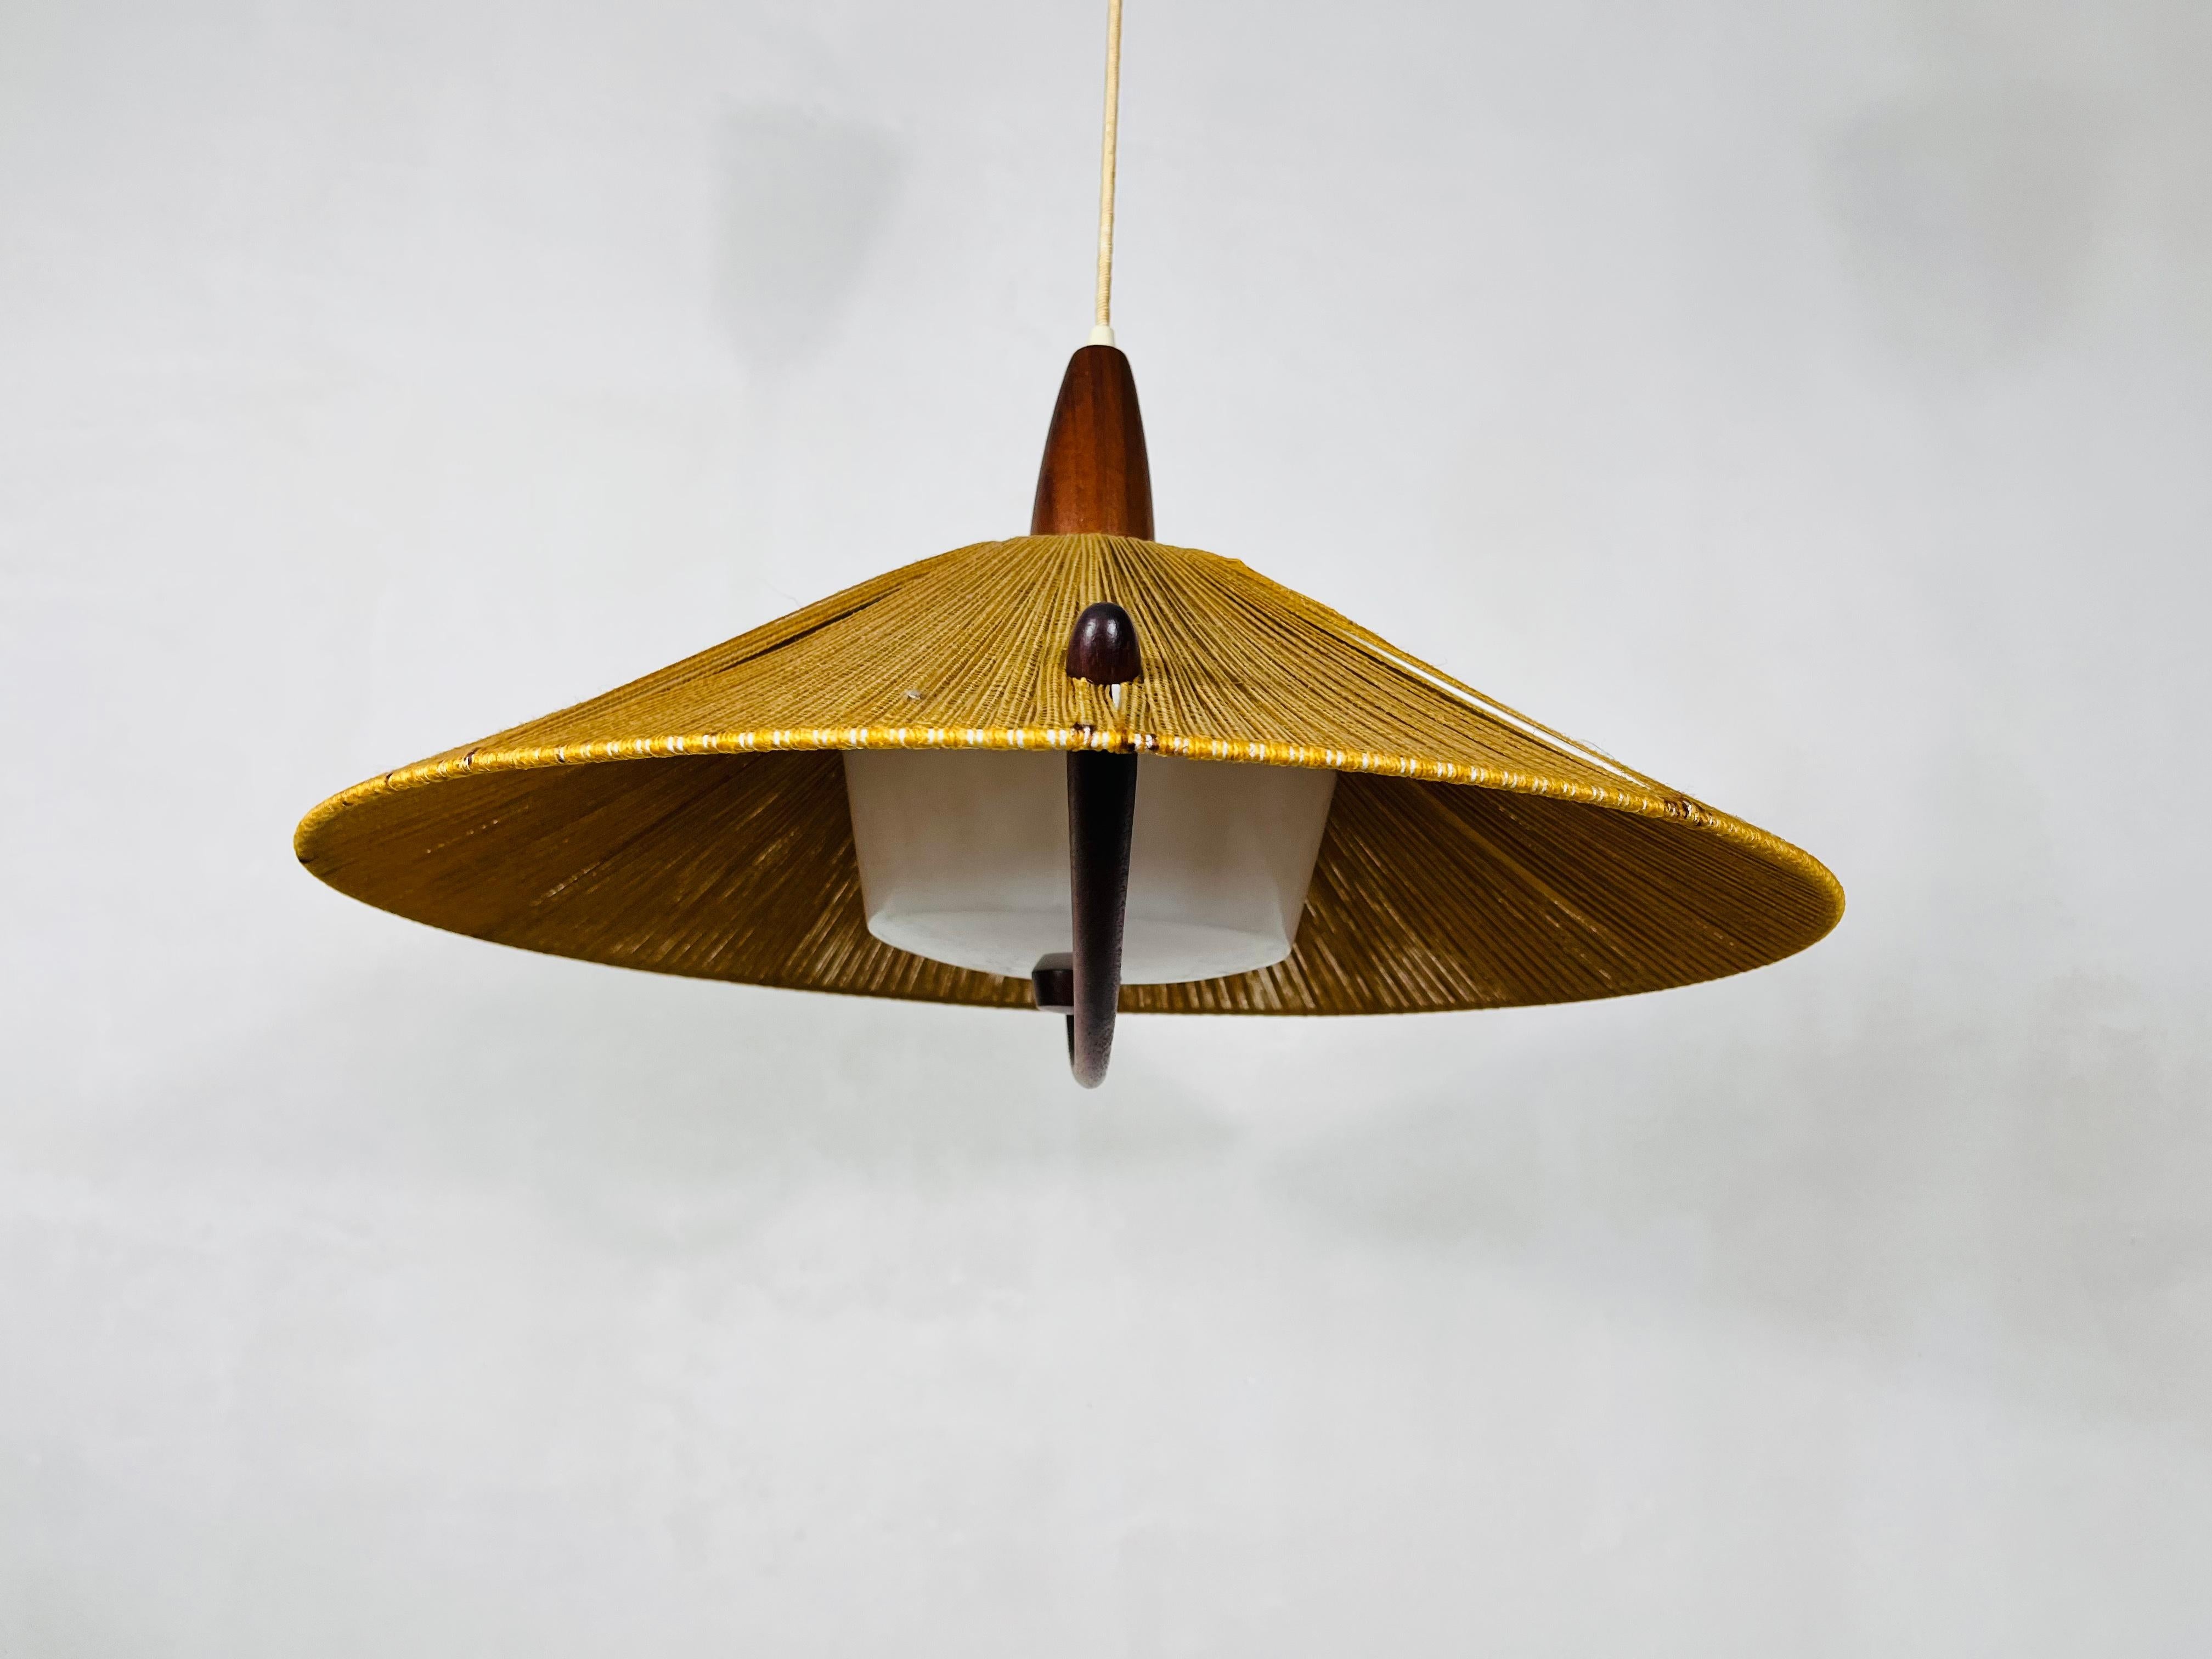 Swiss Midcentury Teak and Cord Shade Hanging Lamp by Temde, circa 1960 For Sale